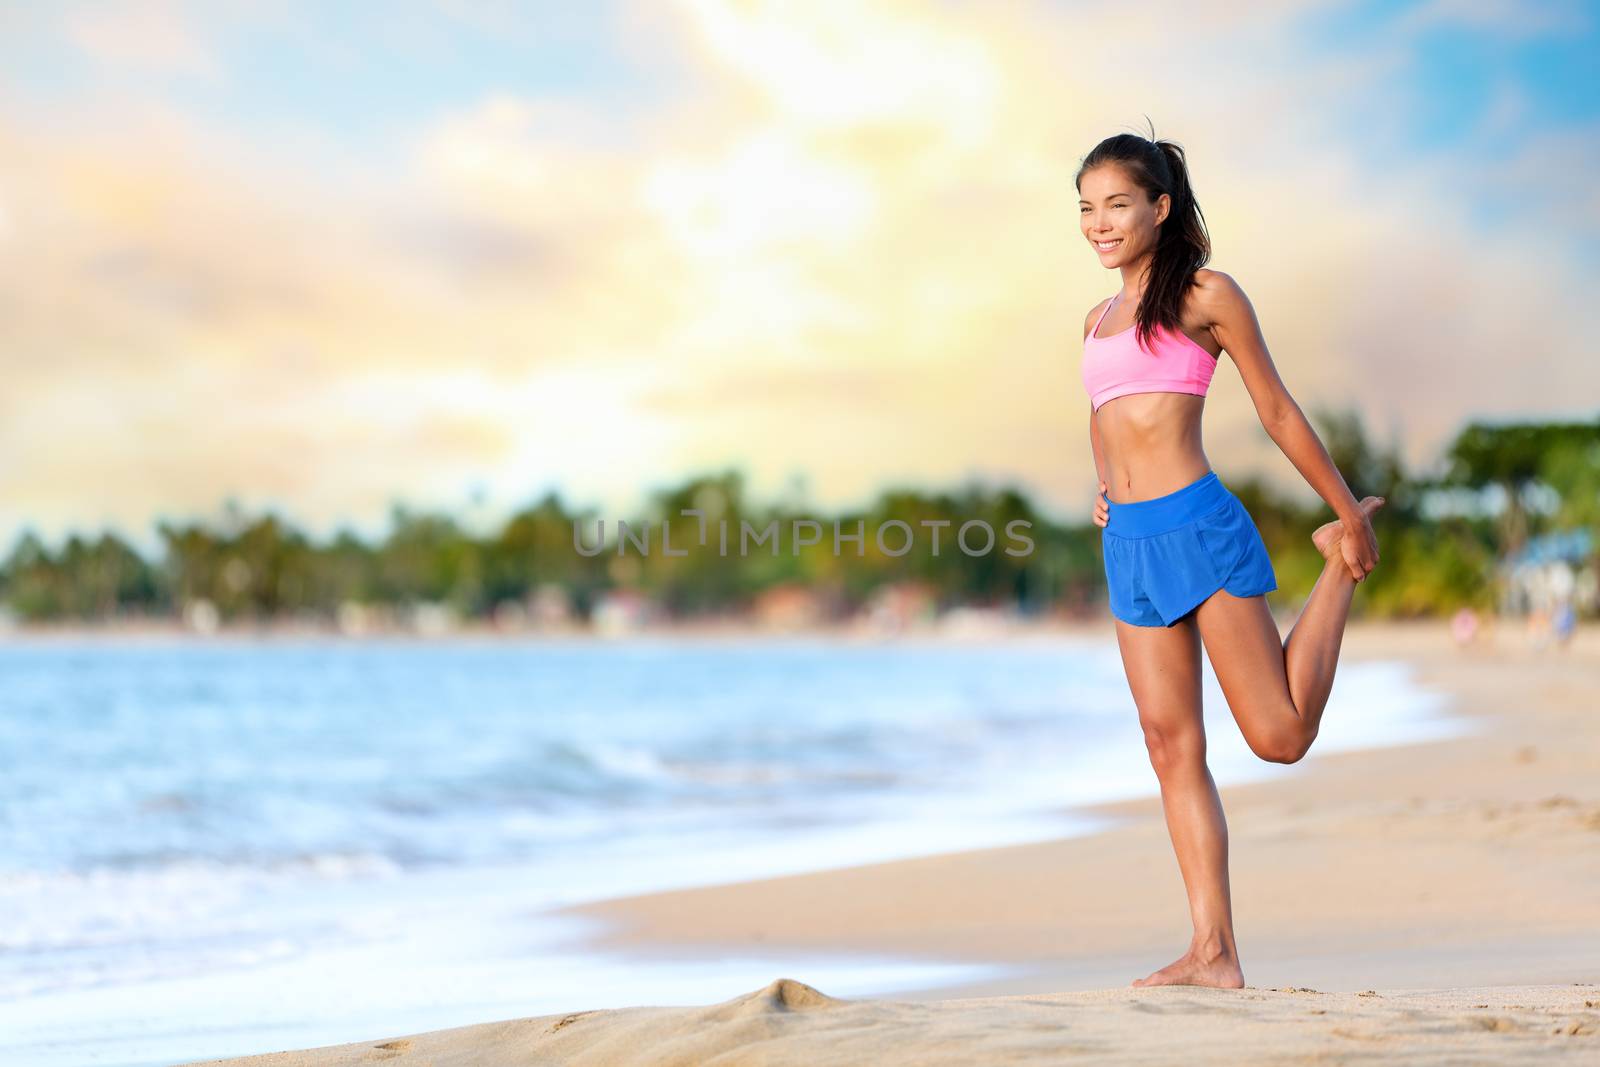 Happy young woman doing stretching exercise on beach. Smiling female is wearing sports bra and shorts. Full length of sporty woman looking away while exercising on sea shore against cloudy sky.